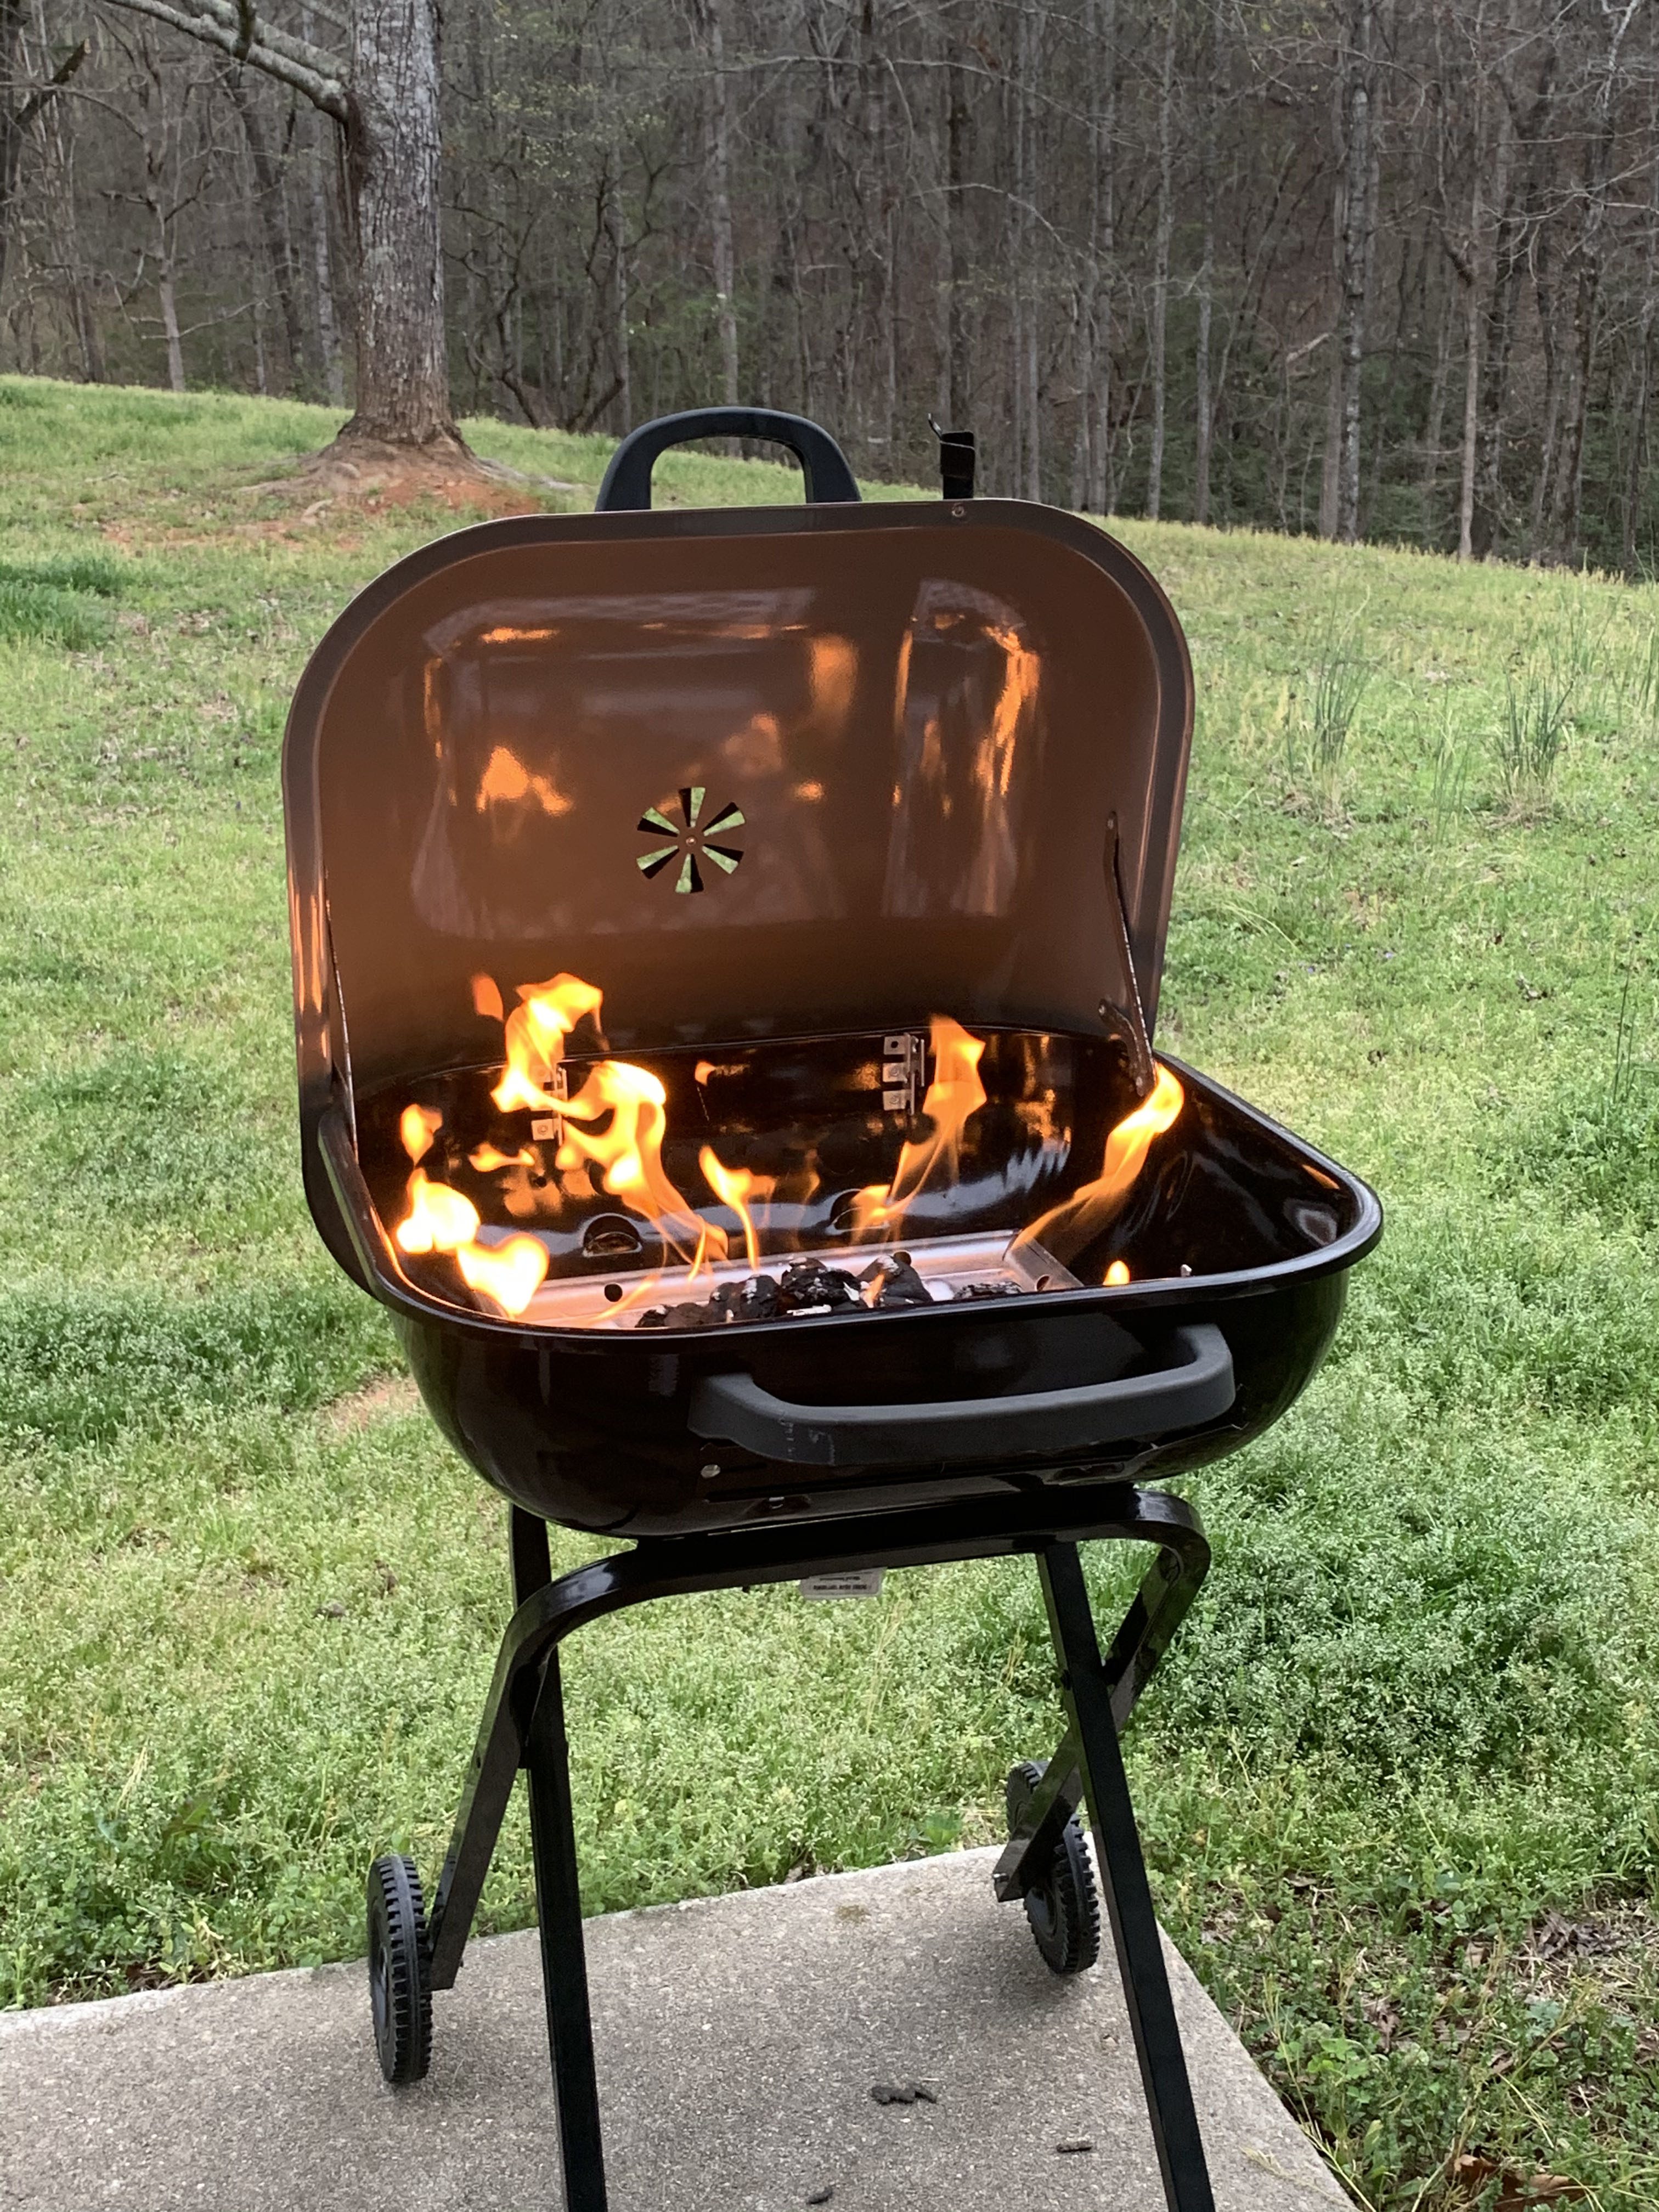 Dan Scott on Twitter: "After years of cooking a gas grill, we've decided to go old school. I'd forgotten how good a charcoal grill smells and the food tastes. #GrillingBurgers #BillyJoelDidntStartThisFireEither